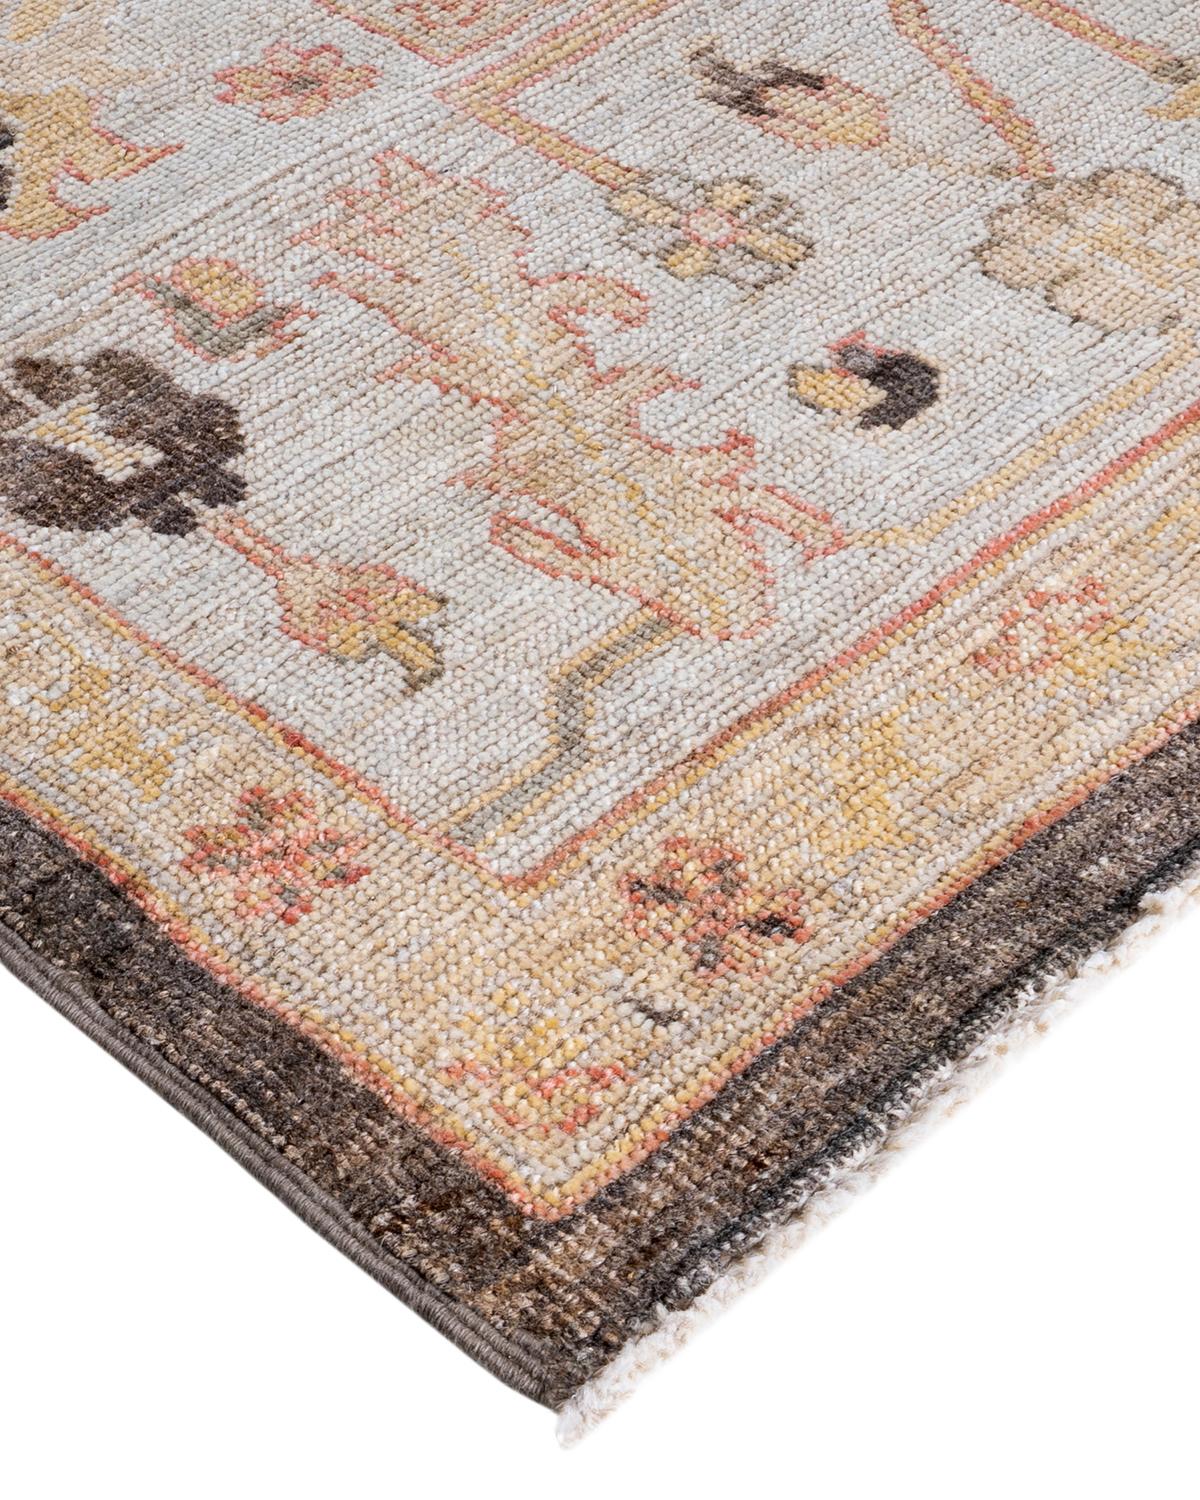 Originating centuries ago in what is now Turkey, Oushak rugs have long been sought after for their intricate patterns, lush yet subtle colors, and soft luster. These rugs continue that tradition. Hand-knotted of wool by skilled artisans, they will